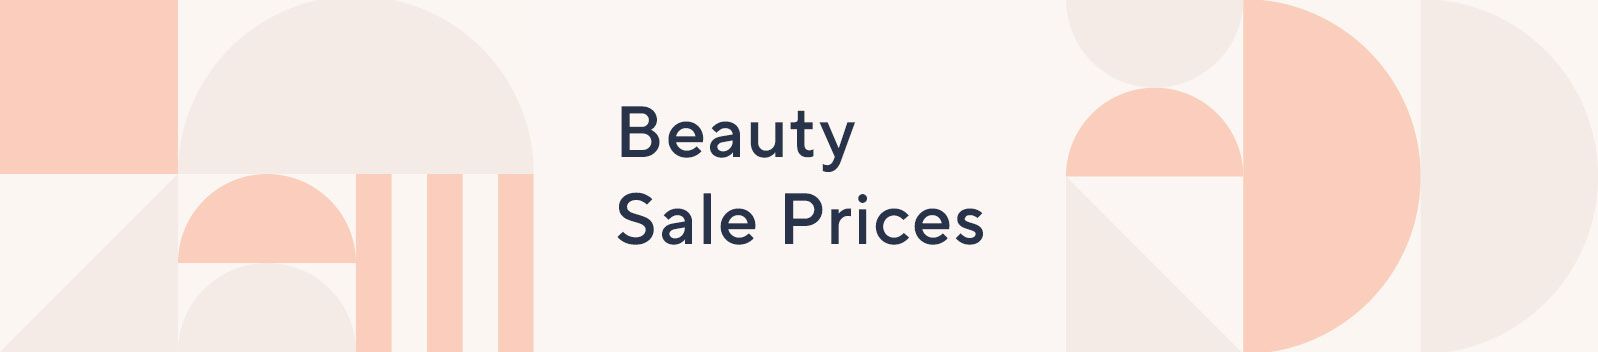 Beauty Sale Prices